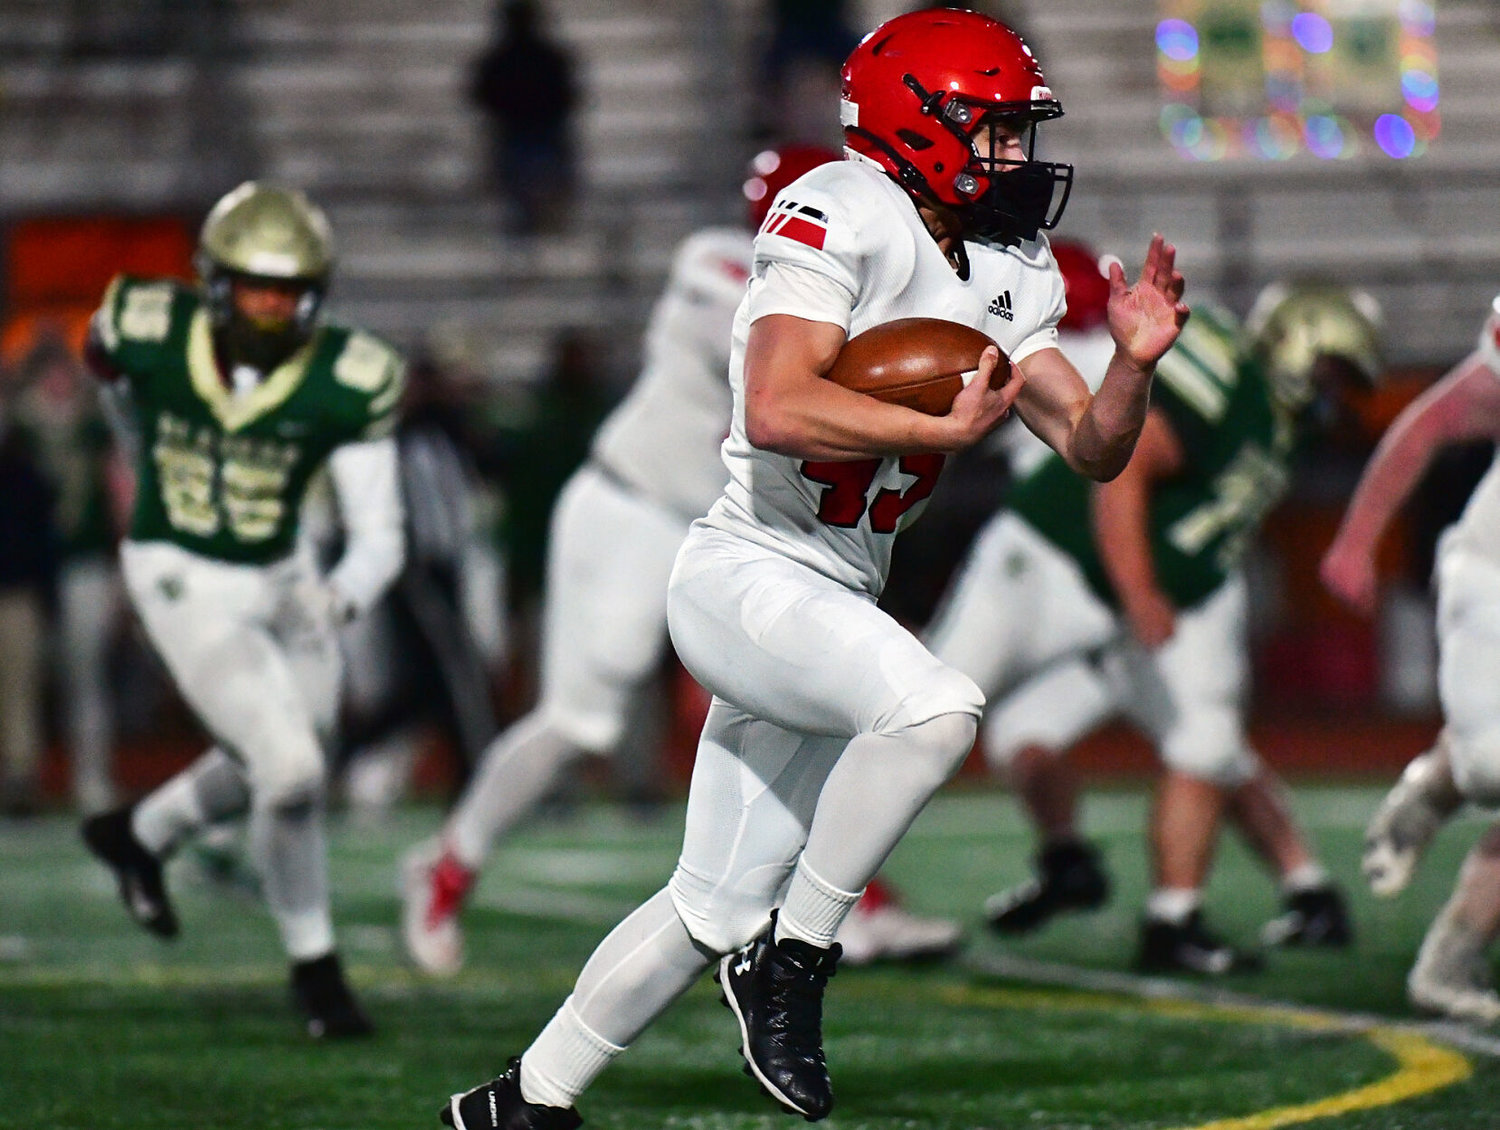 Yelm High School running back Dylan Conklin rambles for long yardage on Friday, March 12, against Timberline High School at South Sound Stadium.